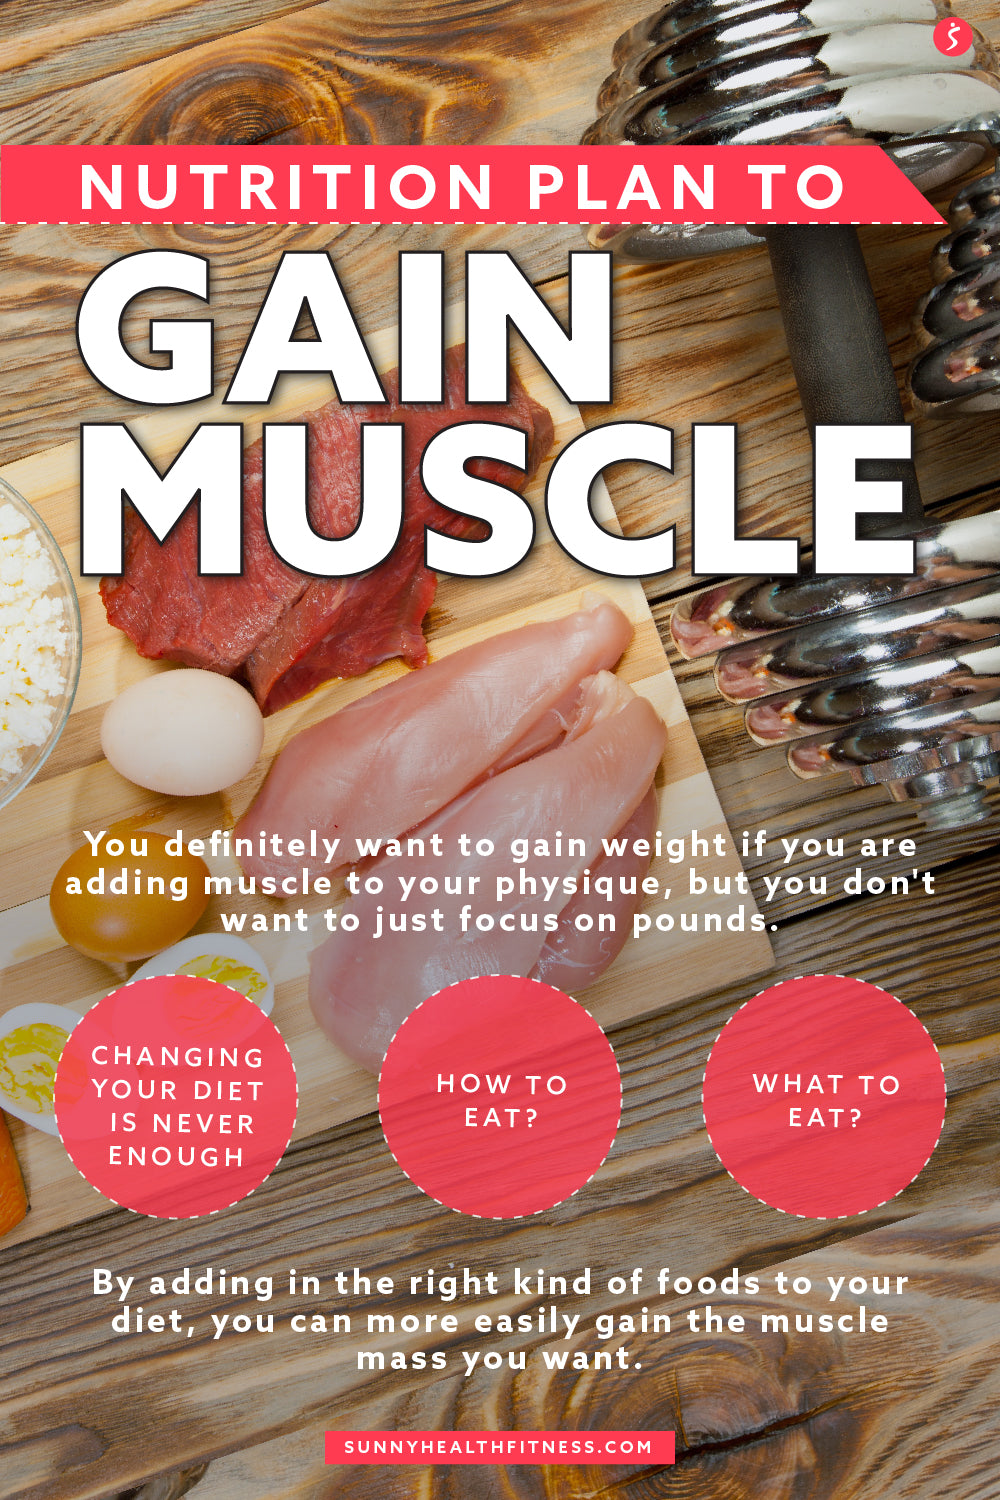 Nutrition Plan to Gain Muscle Infographic